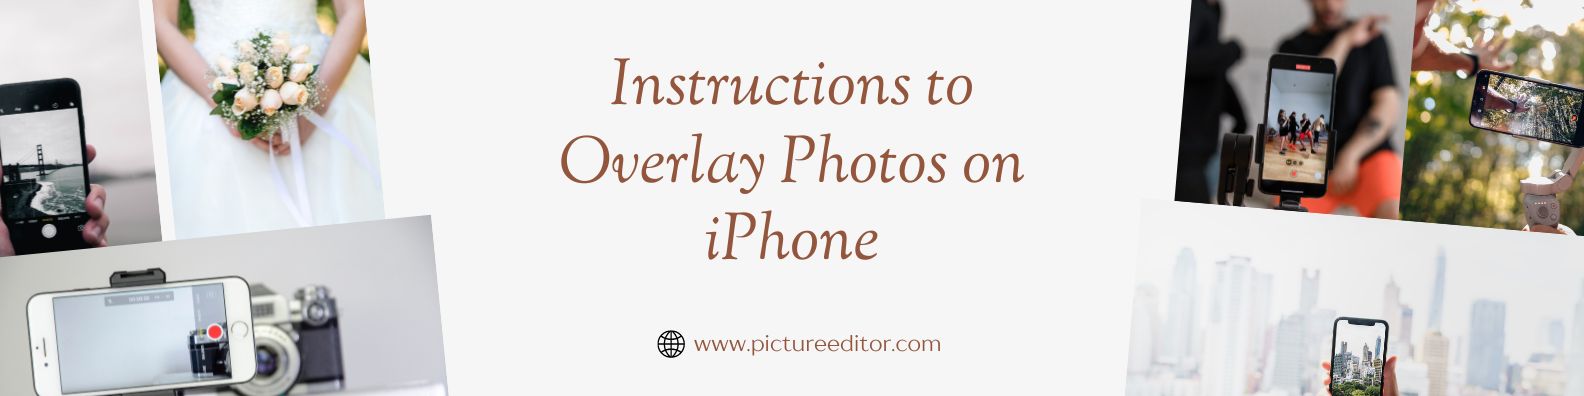 Instructions to Overlay Photos on iPhone